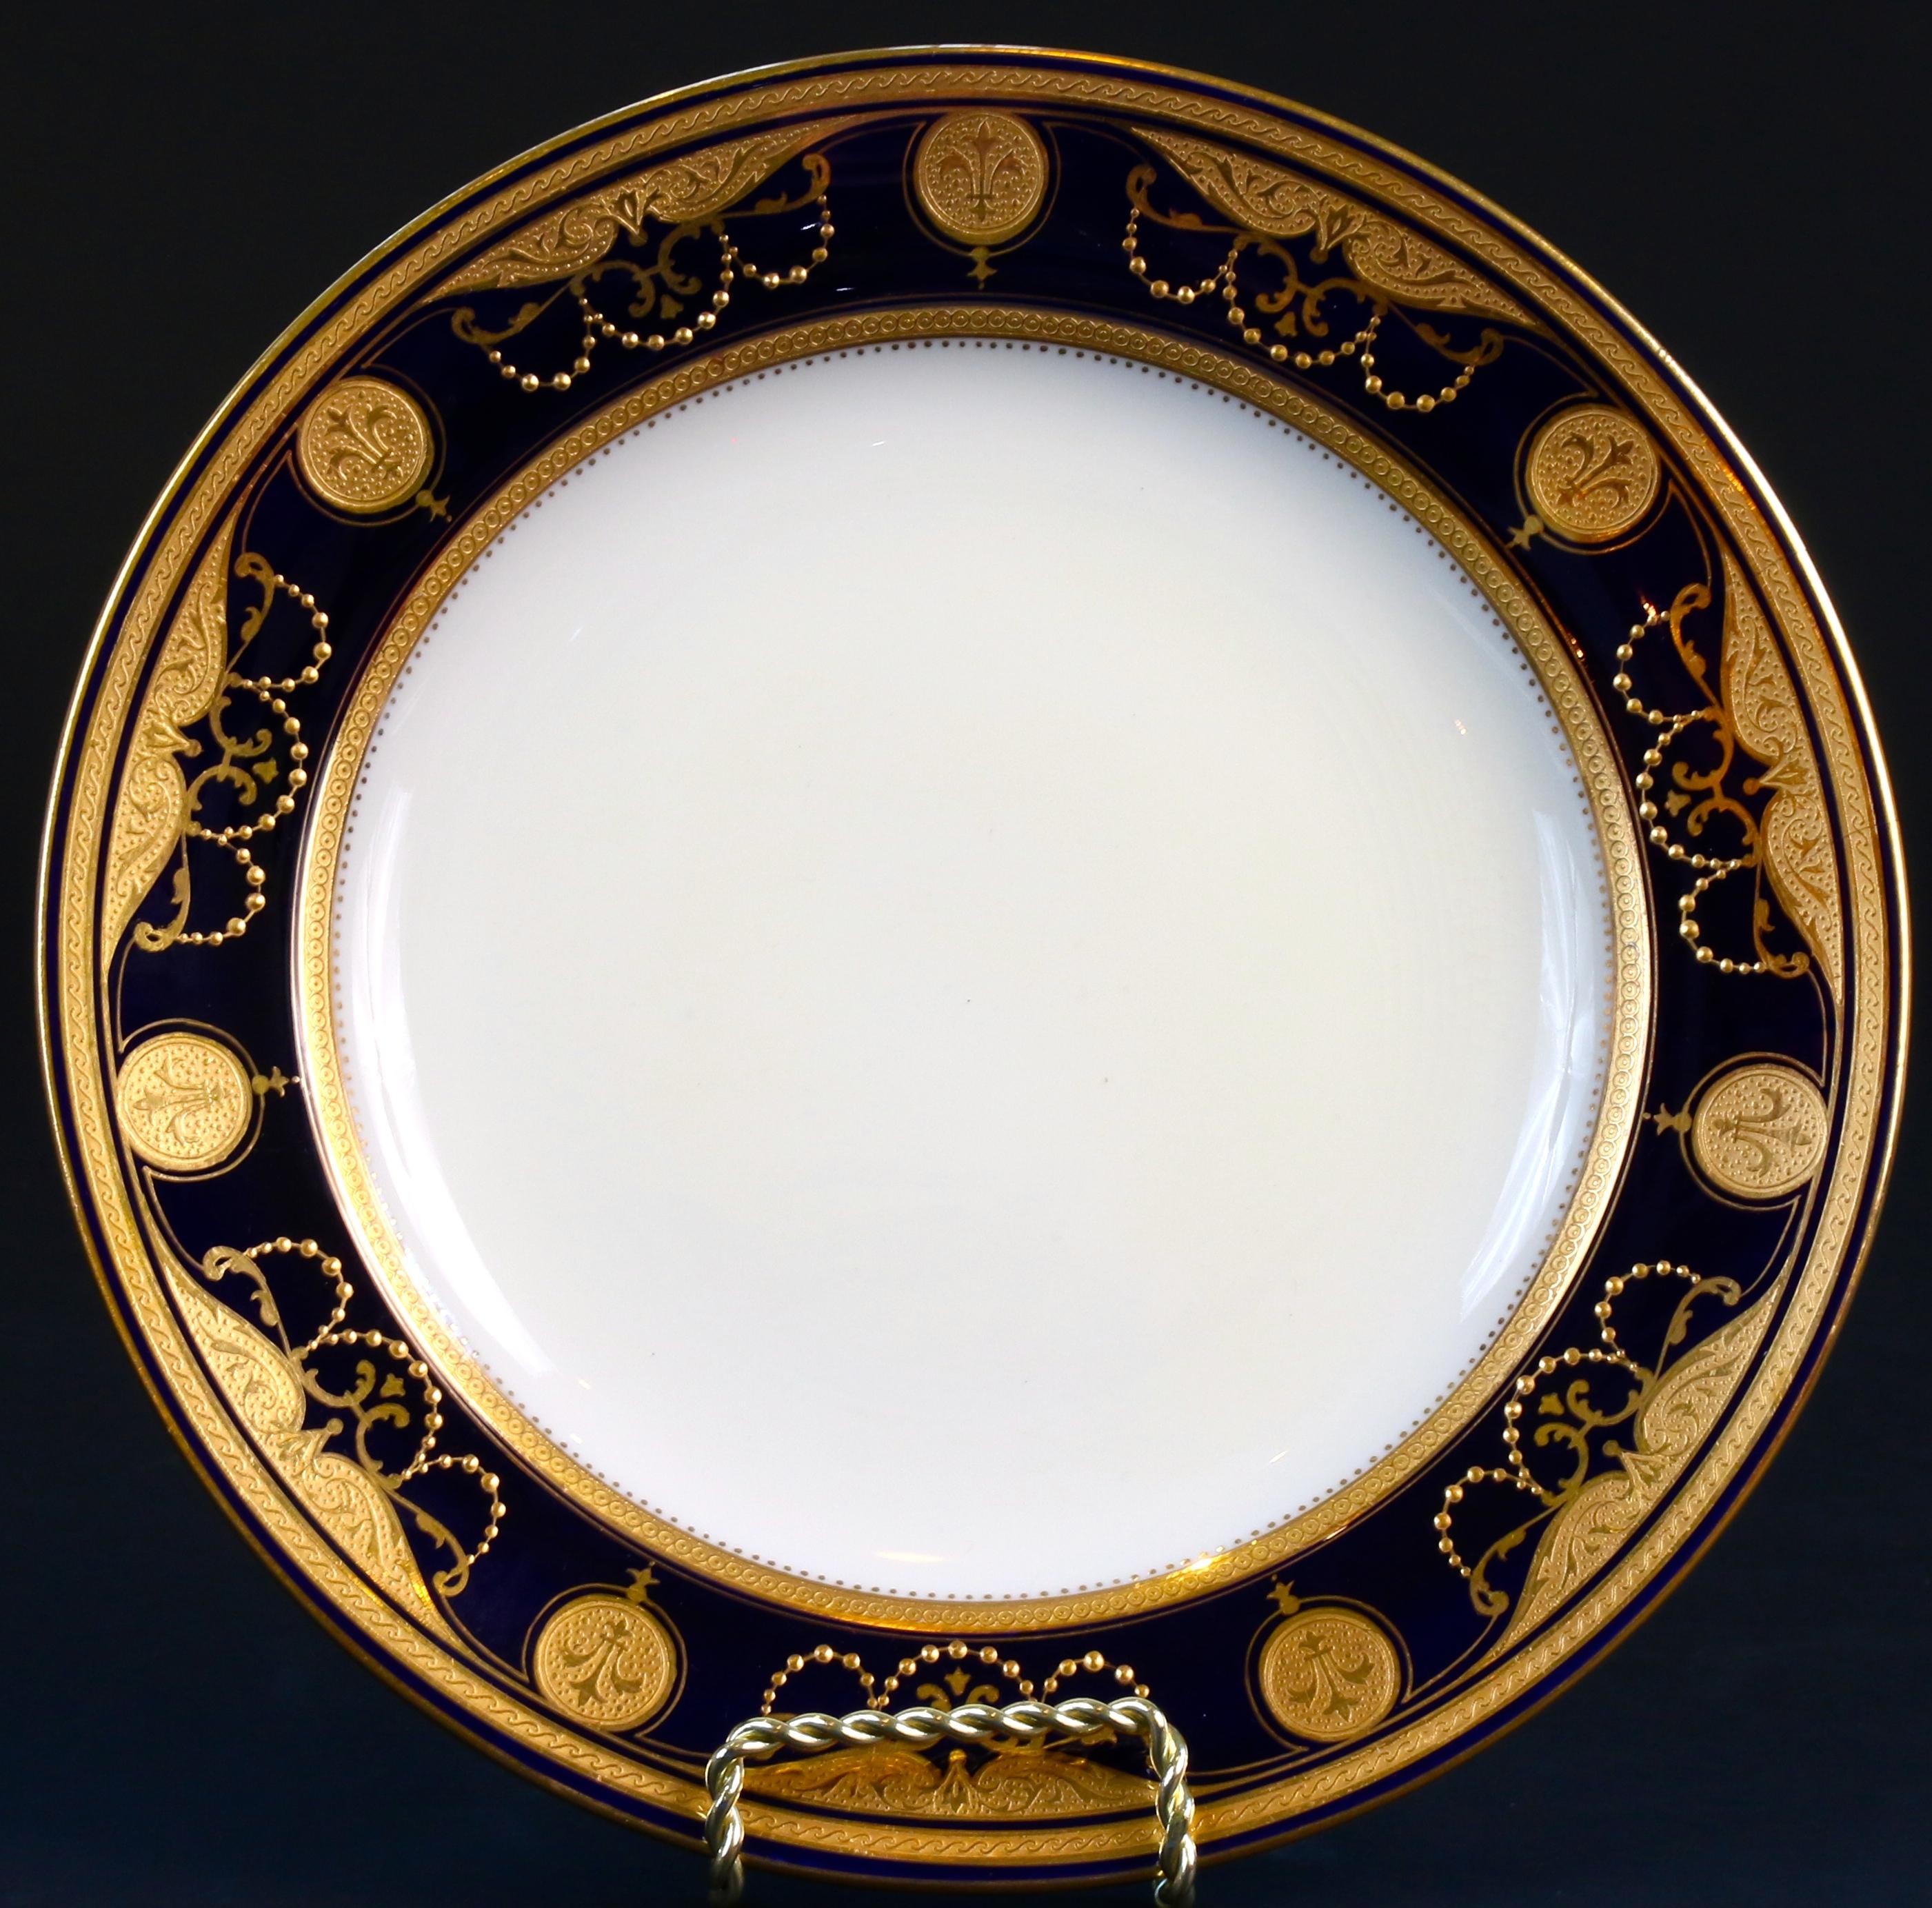 This 19th century Minton, stoke-on-trent, England, cobalt dinner service is both extraordinary and rare. The design features a 22-karat acid-etched gold inner and outer border with 22-karat gold encrusted medallions, swags and gold beading. The set